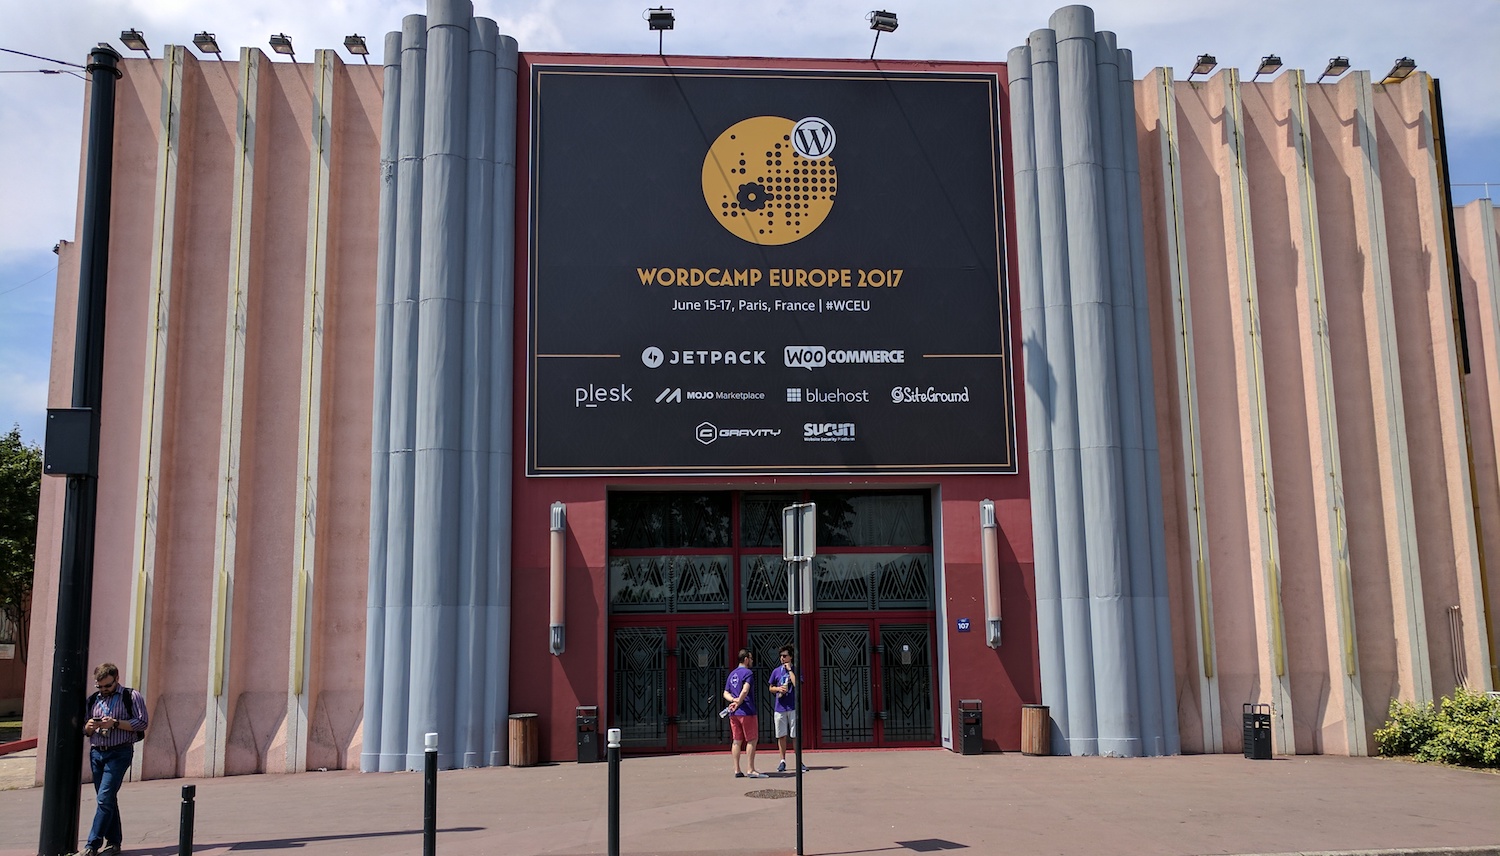 WordCamp Europe 2017 Kicks Off with Contributor Day Focused on Growing WordPress through Inclusion